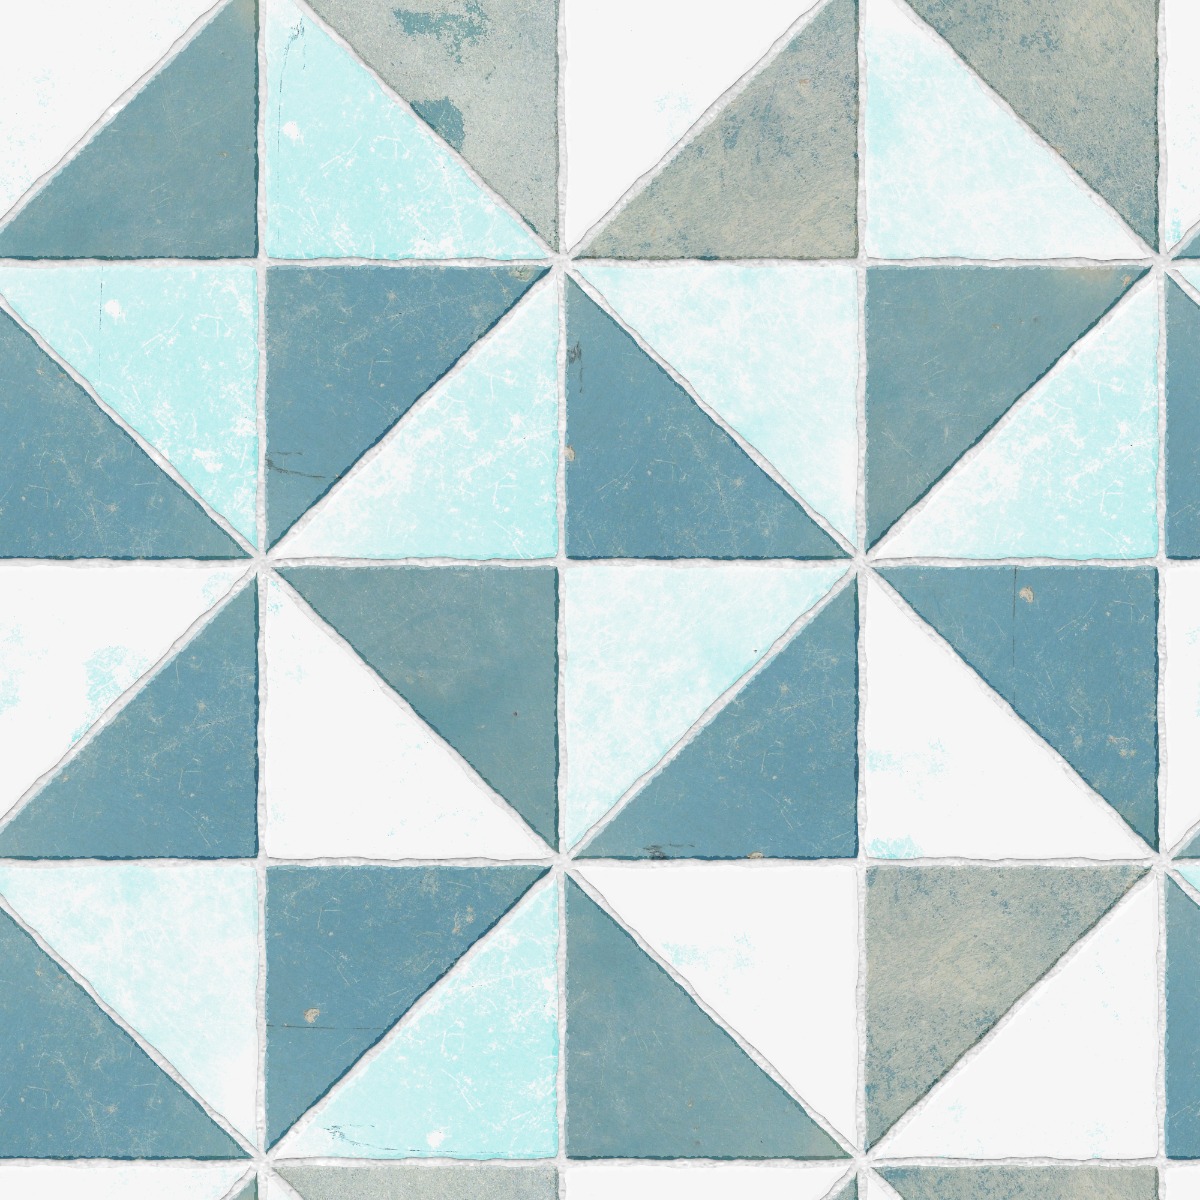 A seamless  texture with blue tile units arranged in a Triangle Diamond pattern